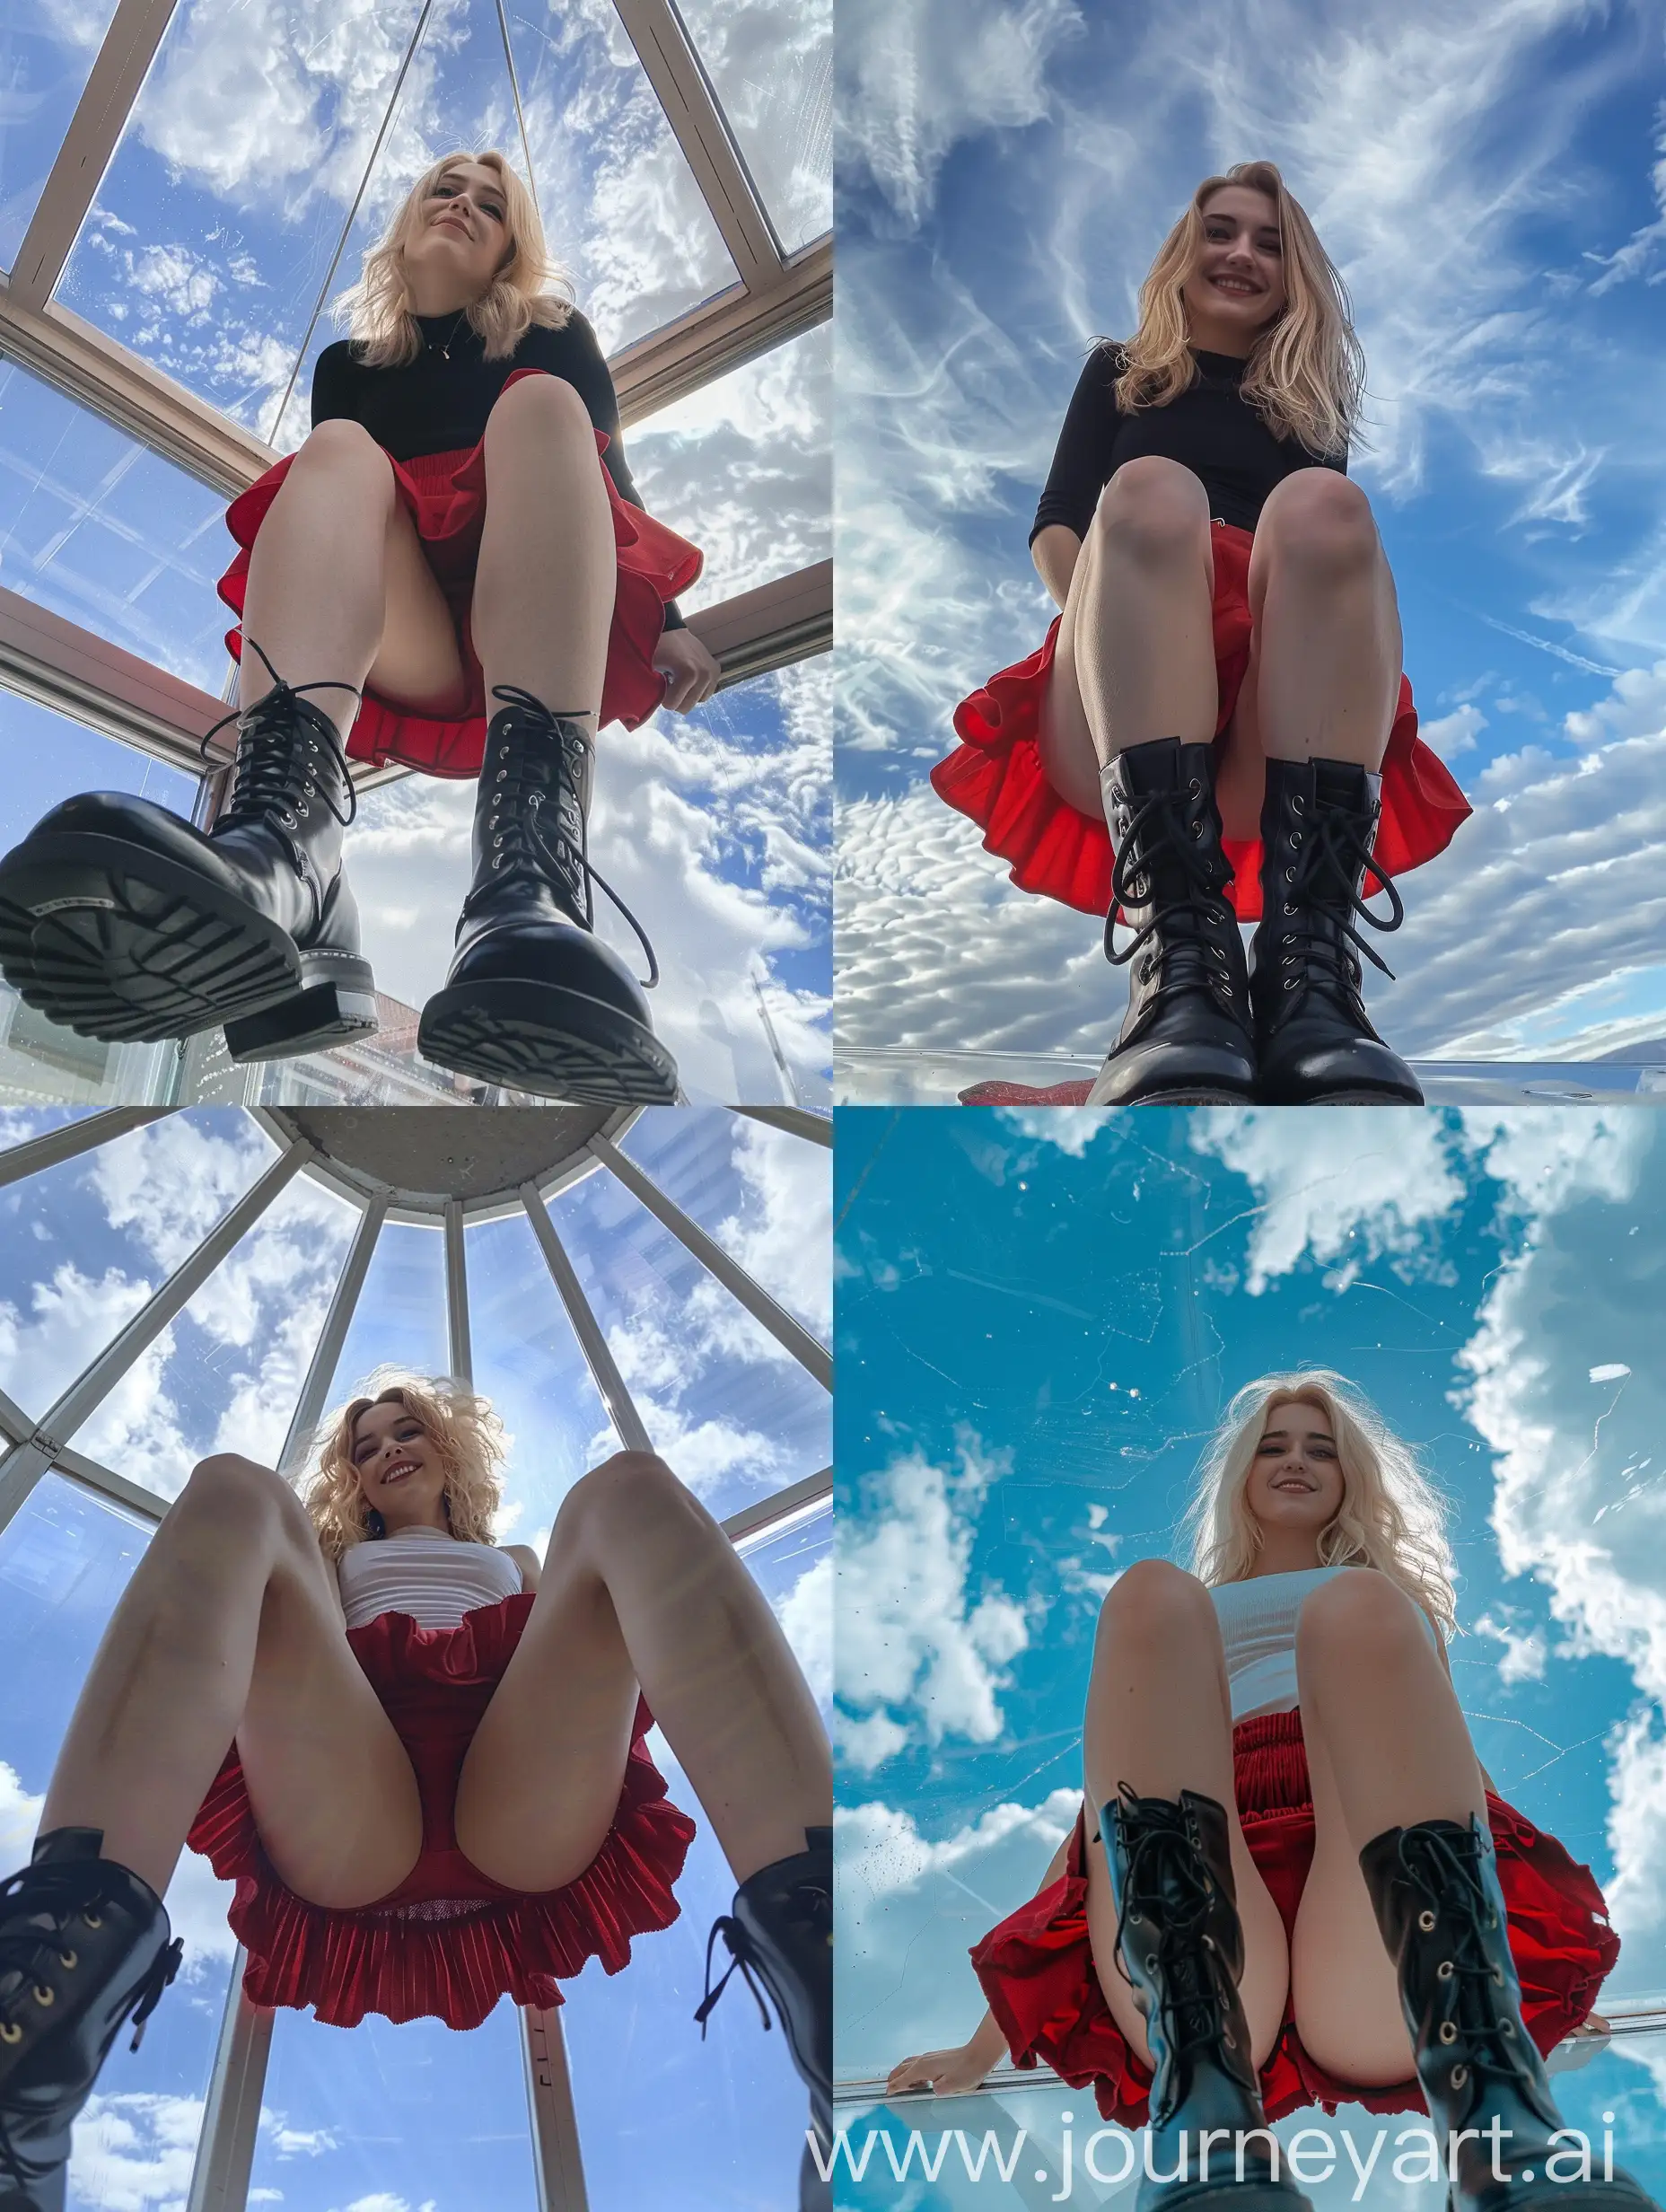 Young-Woman-Taking-Natural-Selfie-on-Glass-Surface-with-Sky-View